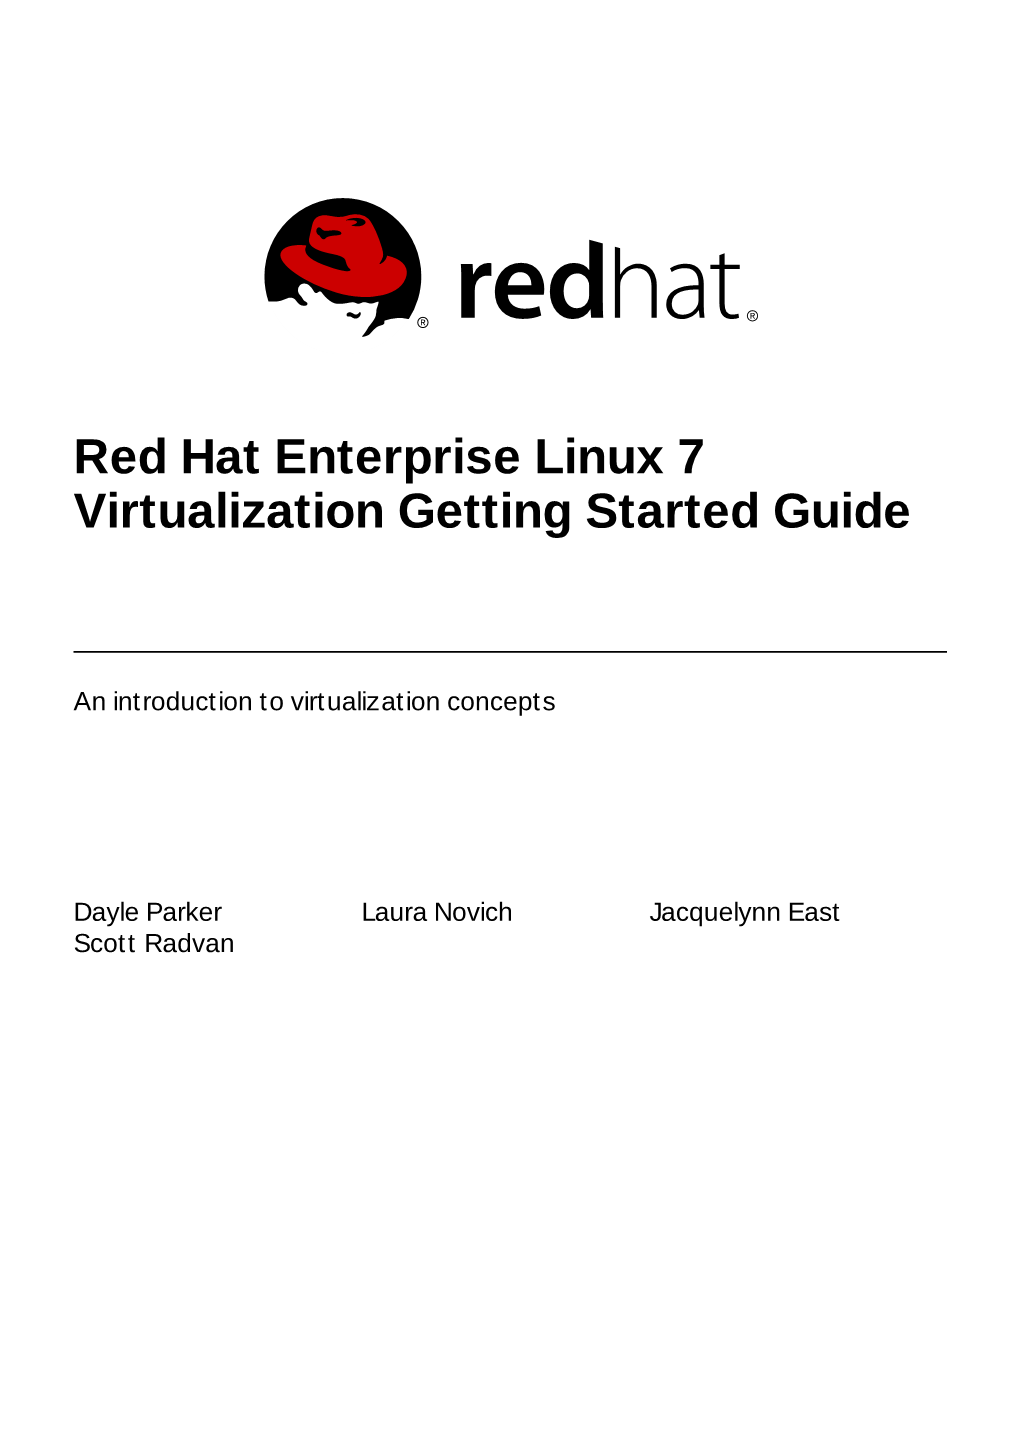 Red Hat Enterprise Linux 7 Virtualization Getting Started Guide